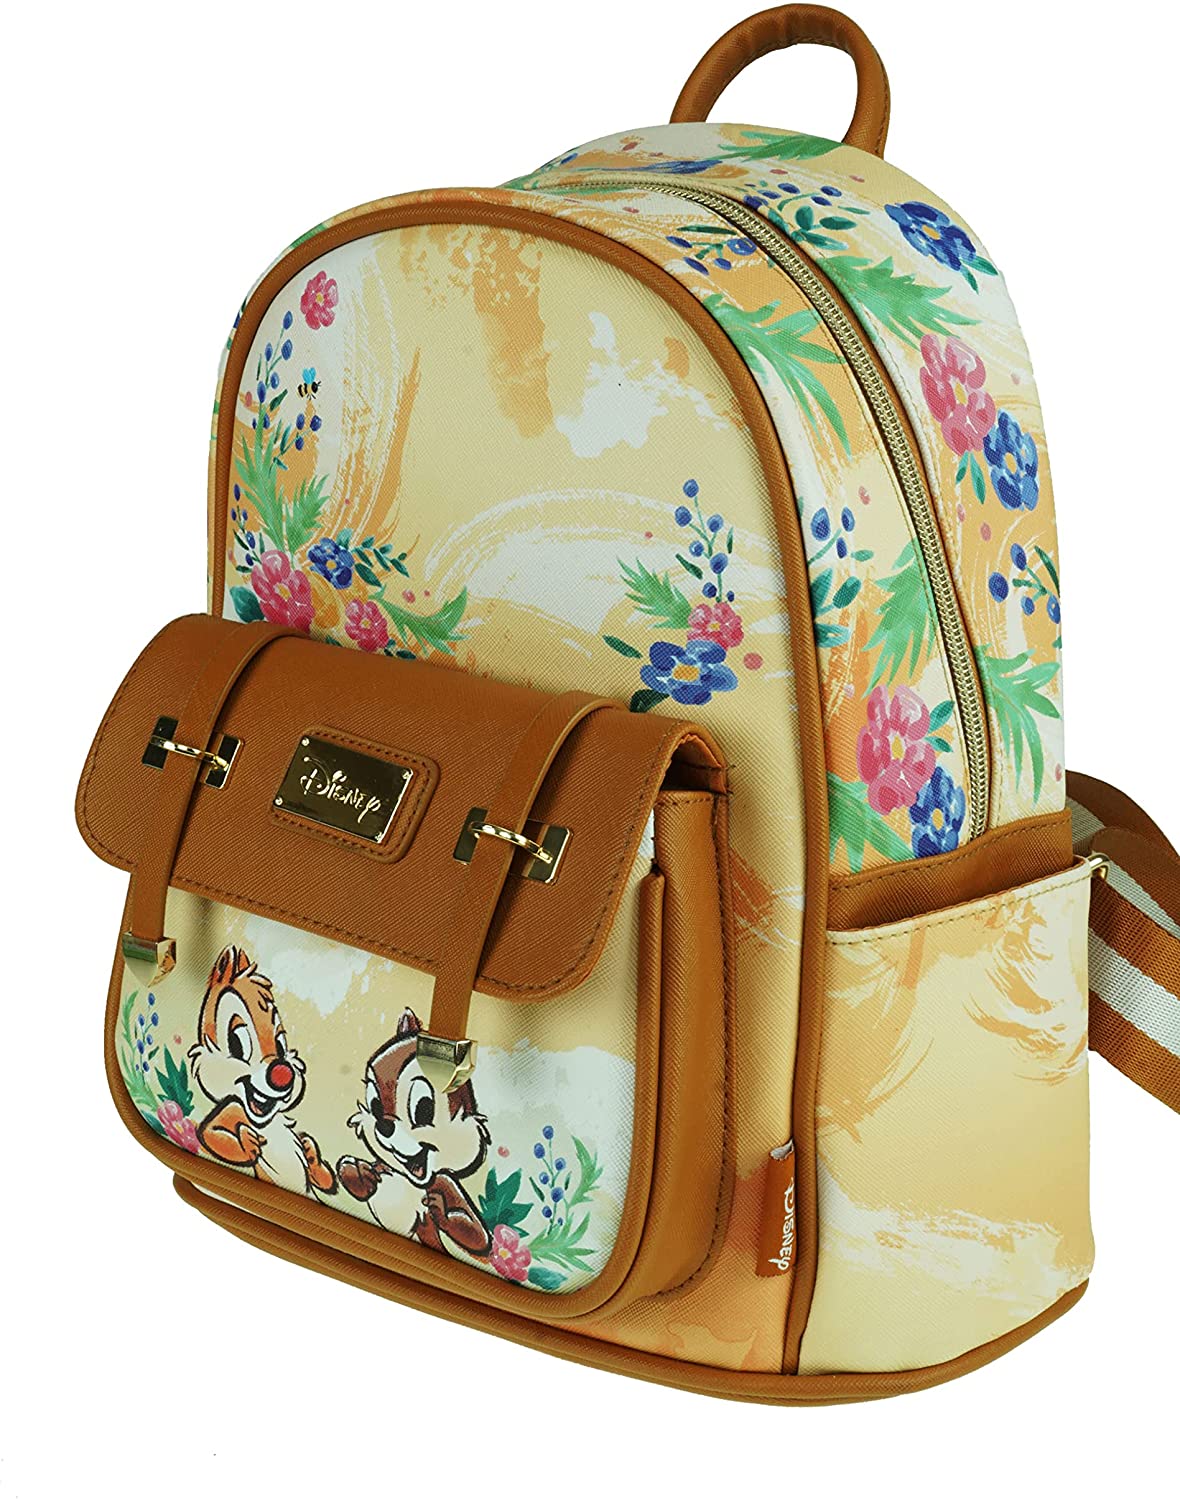 Chip 'n' Dale 11" Vegan Leather Mini Backpack - A21776 - GTE Zone